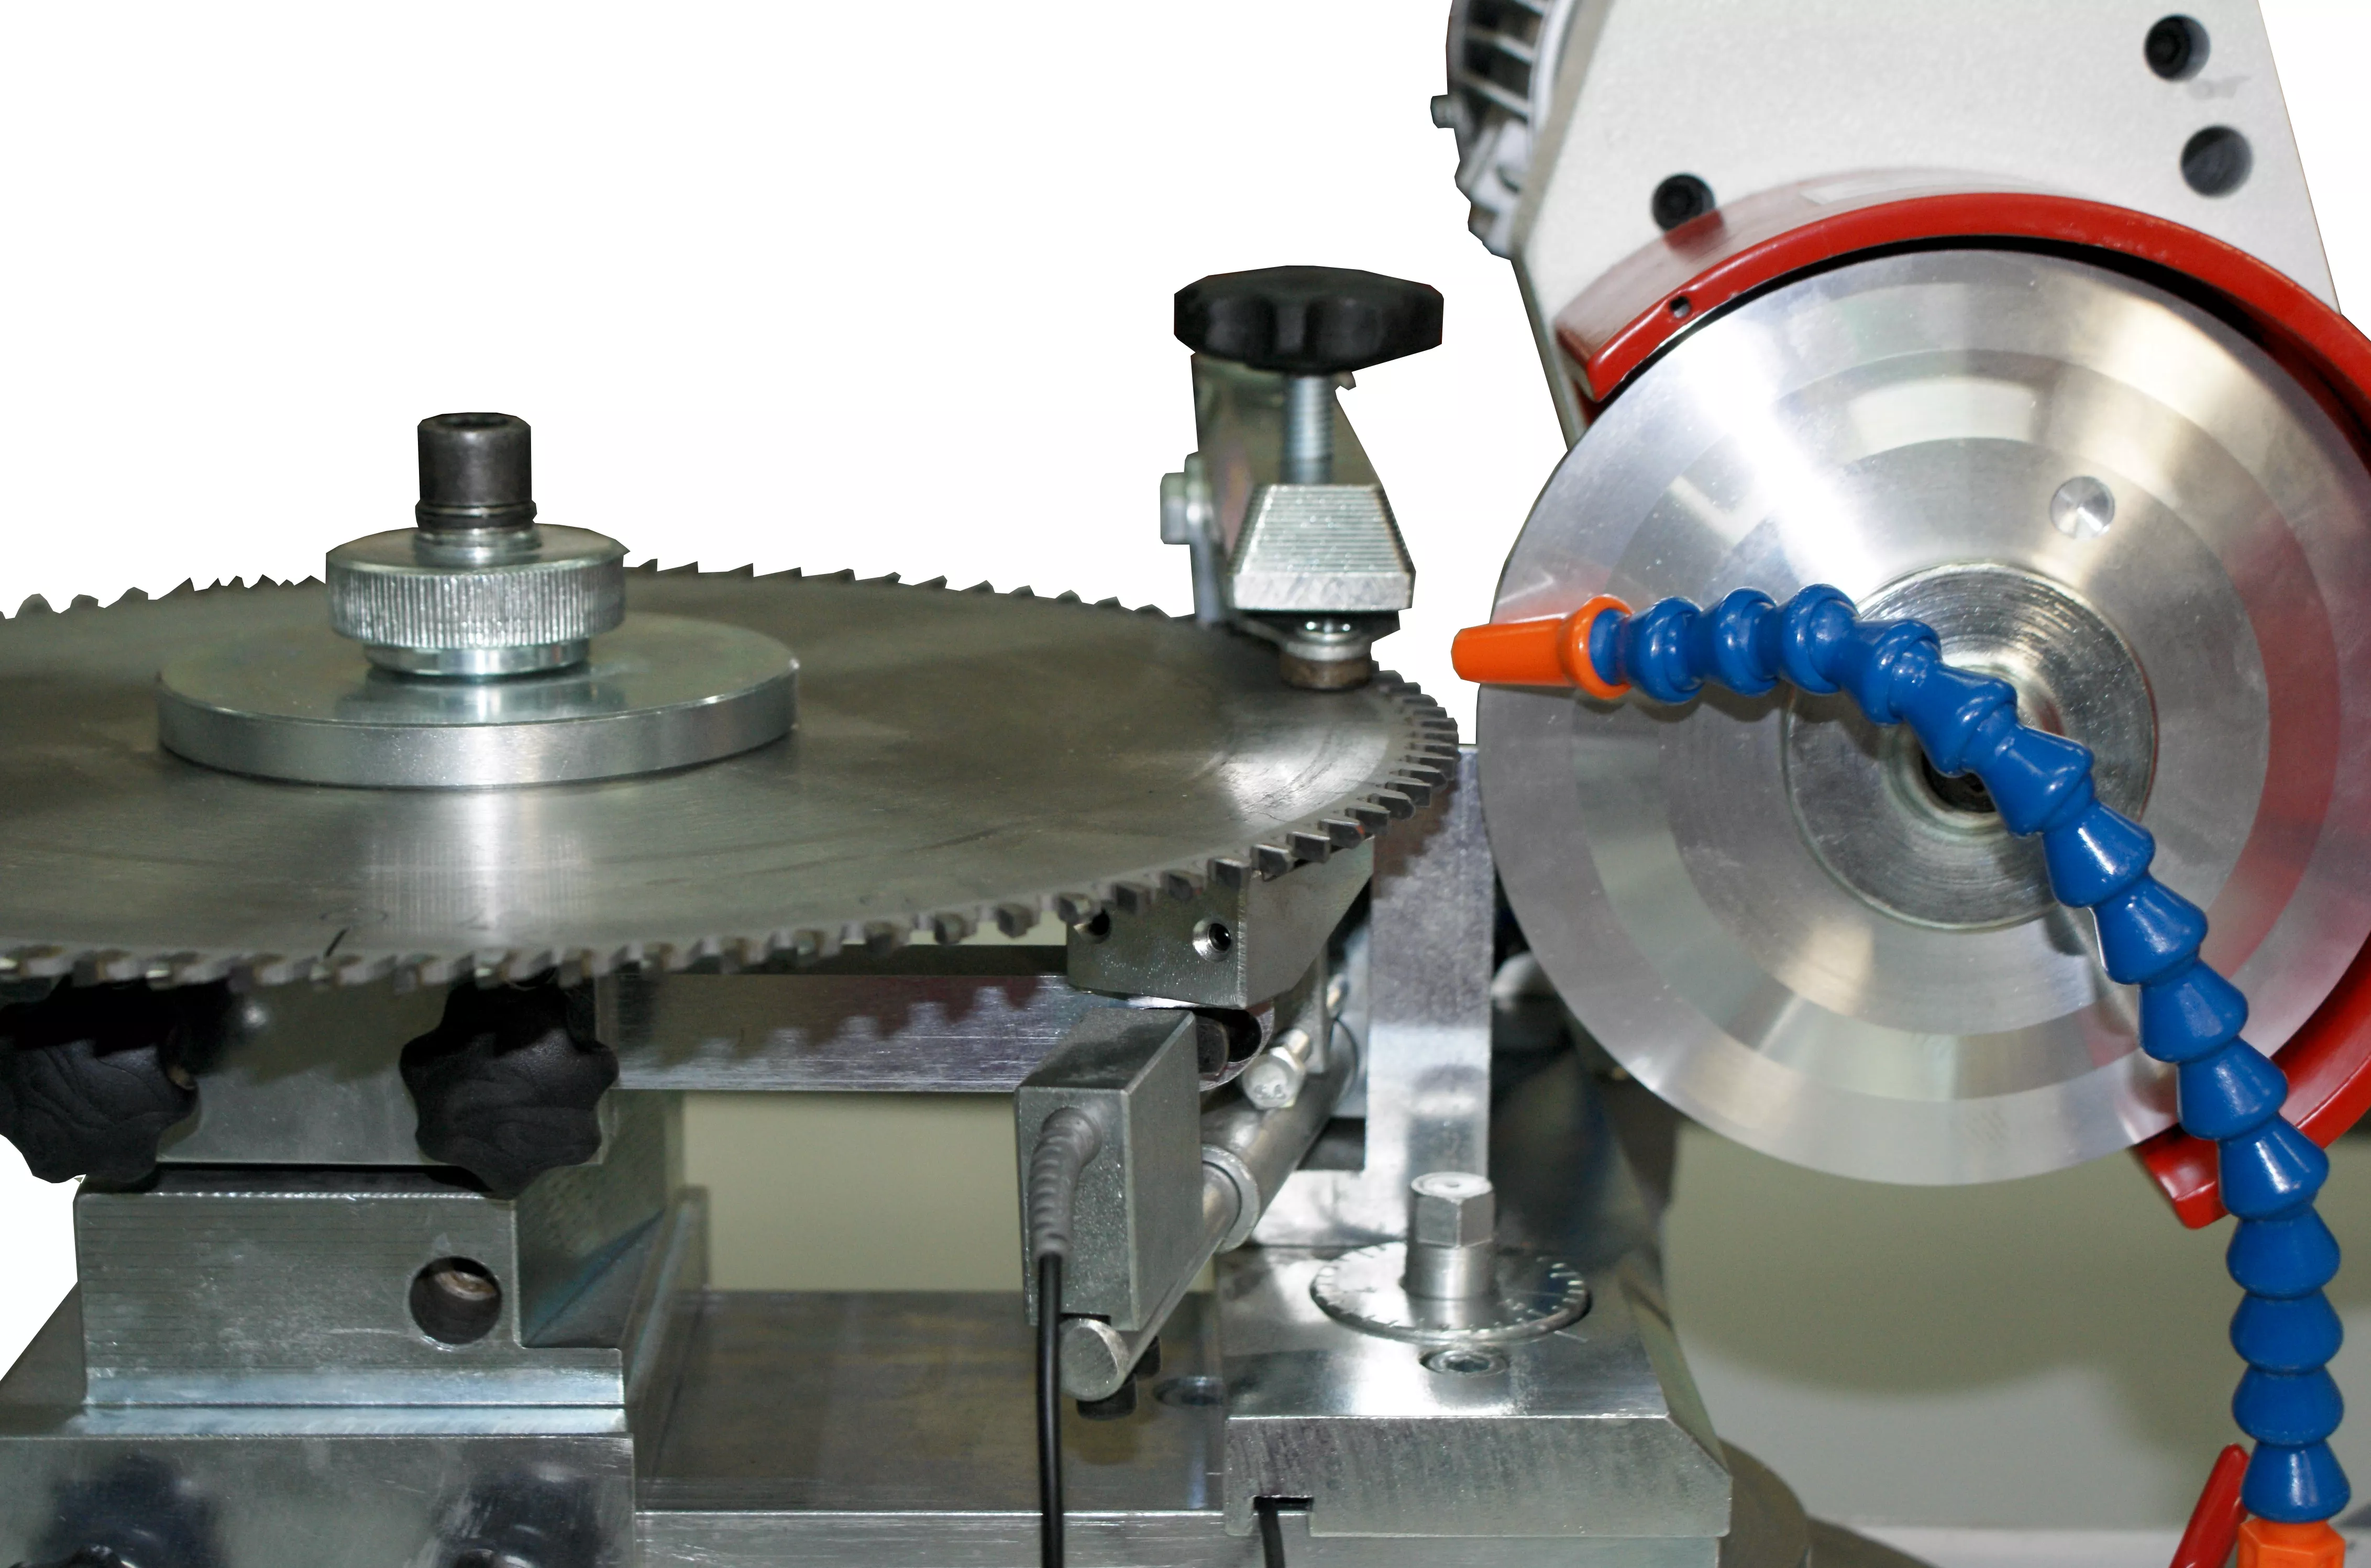 SOLUTIONS FOR CIRCULAR SAWS